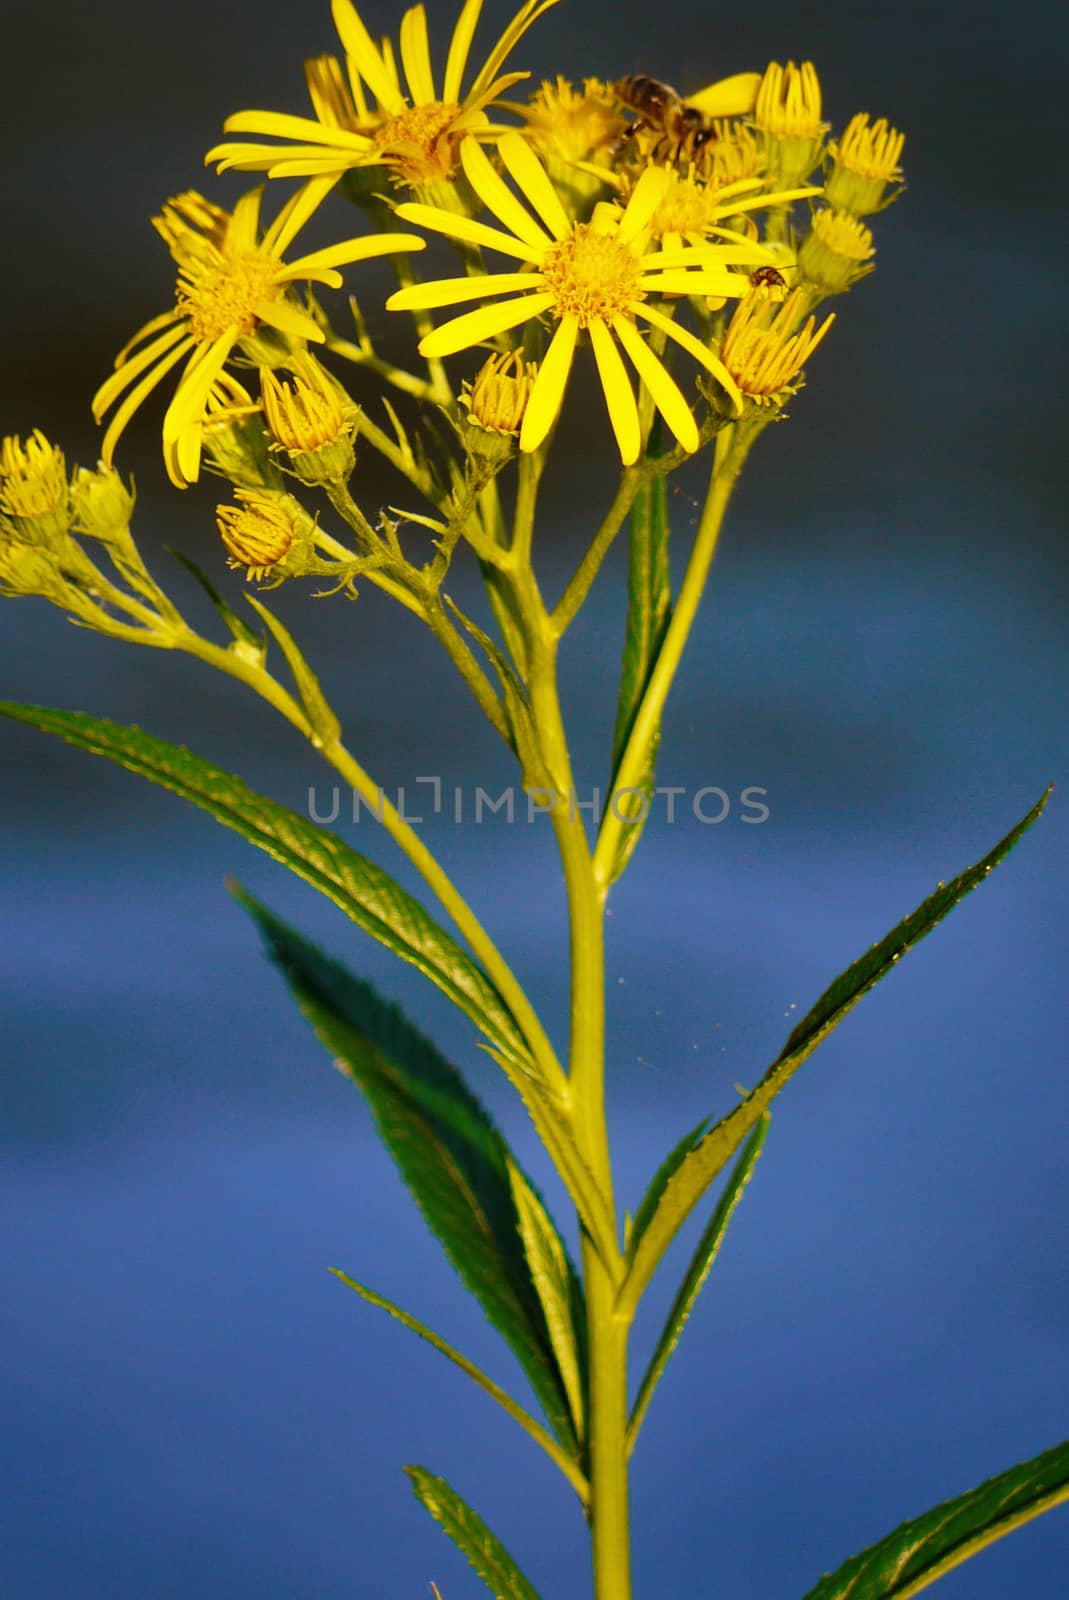 A small green plant with yellow flowers on a blue, blurred background